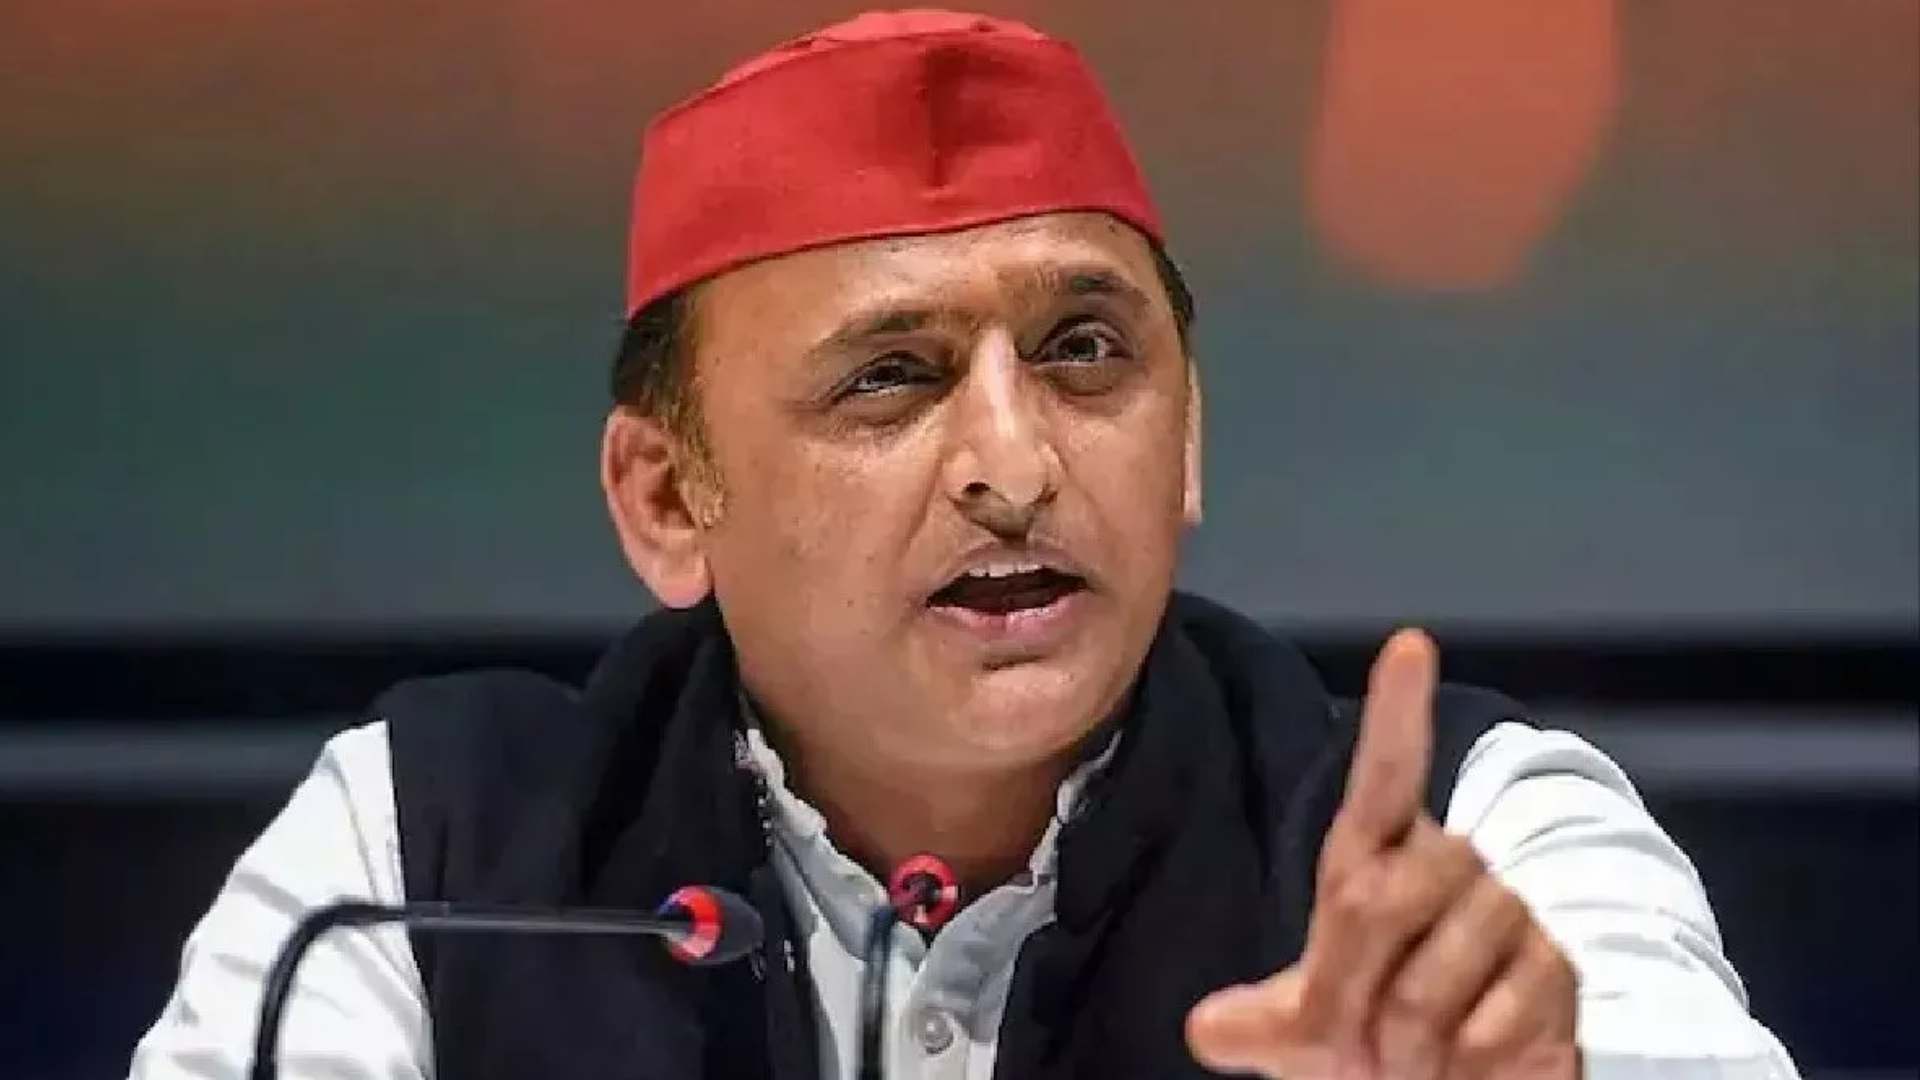 Akhilesh Yadav does not allow anyone from backward classes to be leaders: OP Rabhar